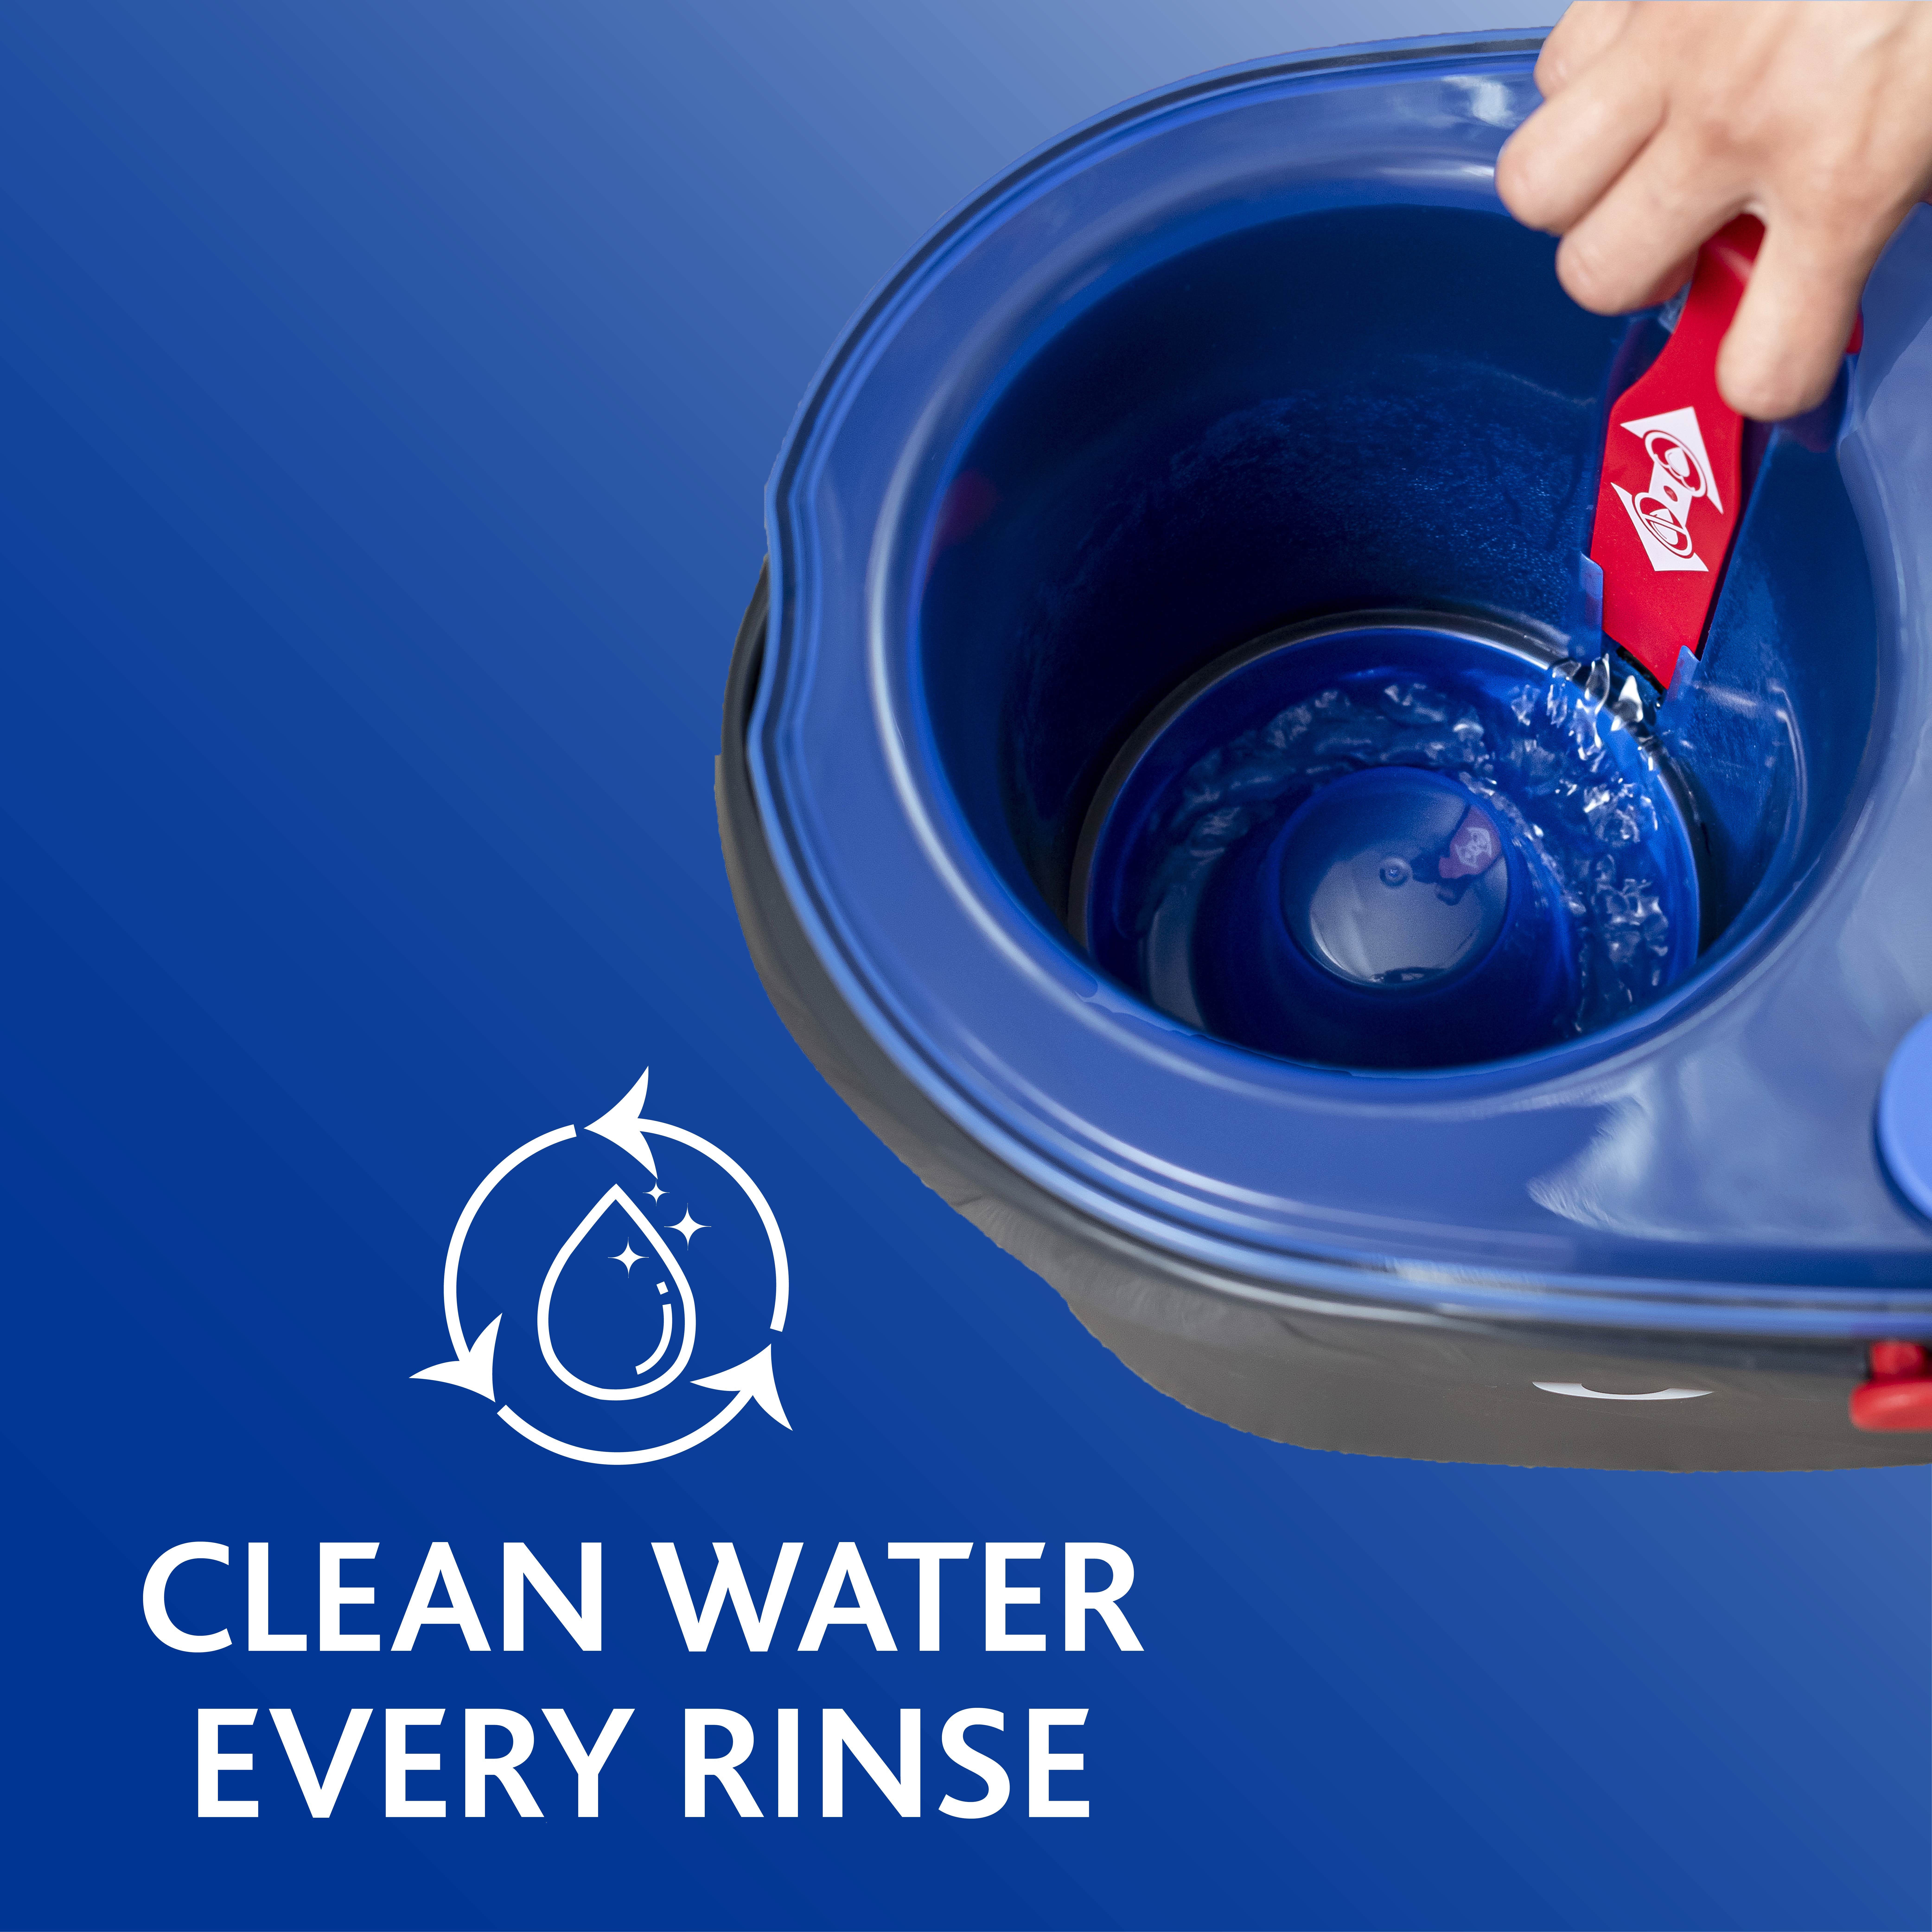 O-Cedar EasyWring RinseClean Spin Mop and Bucket System, Hands-Free System - image 6 of 25